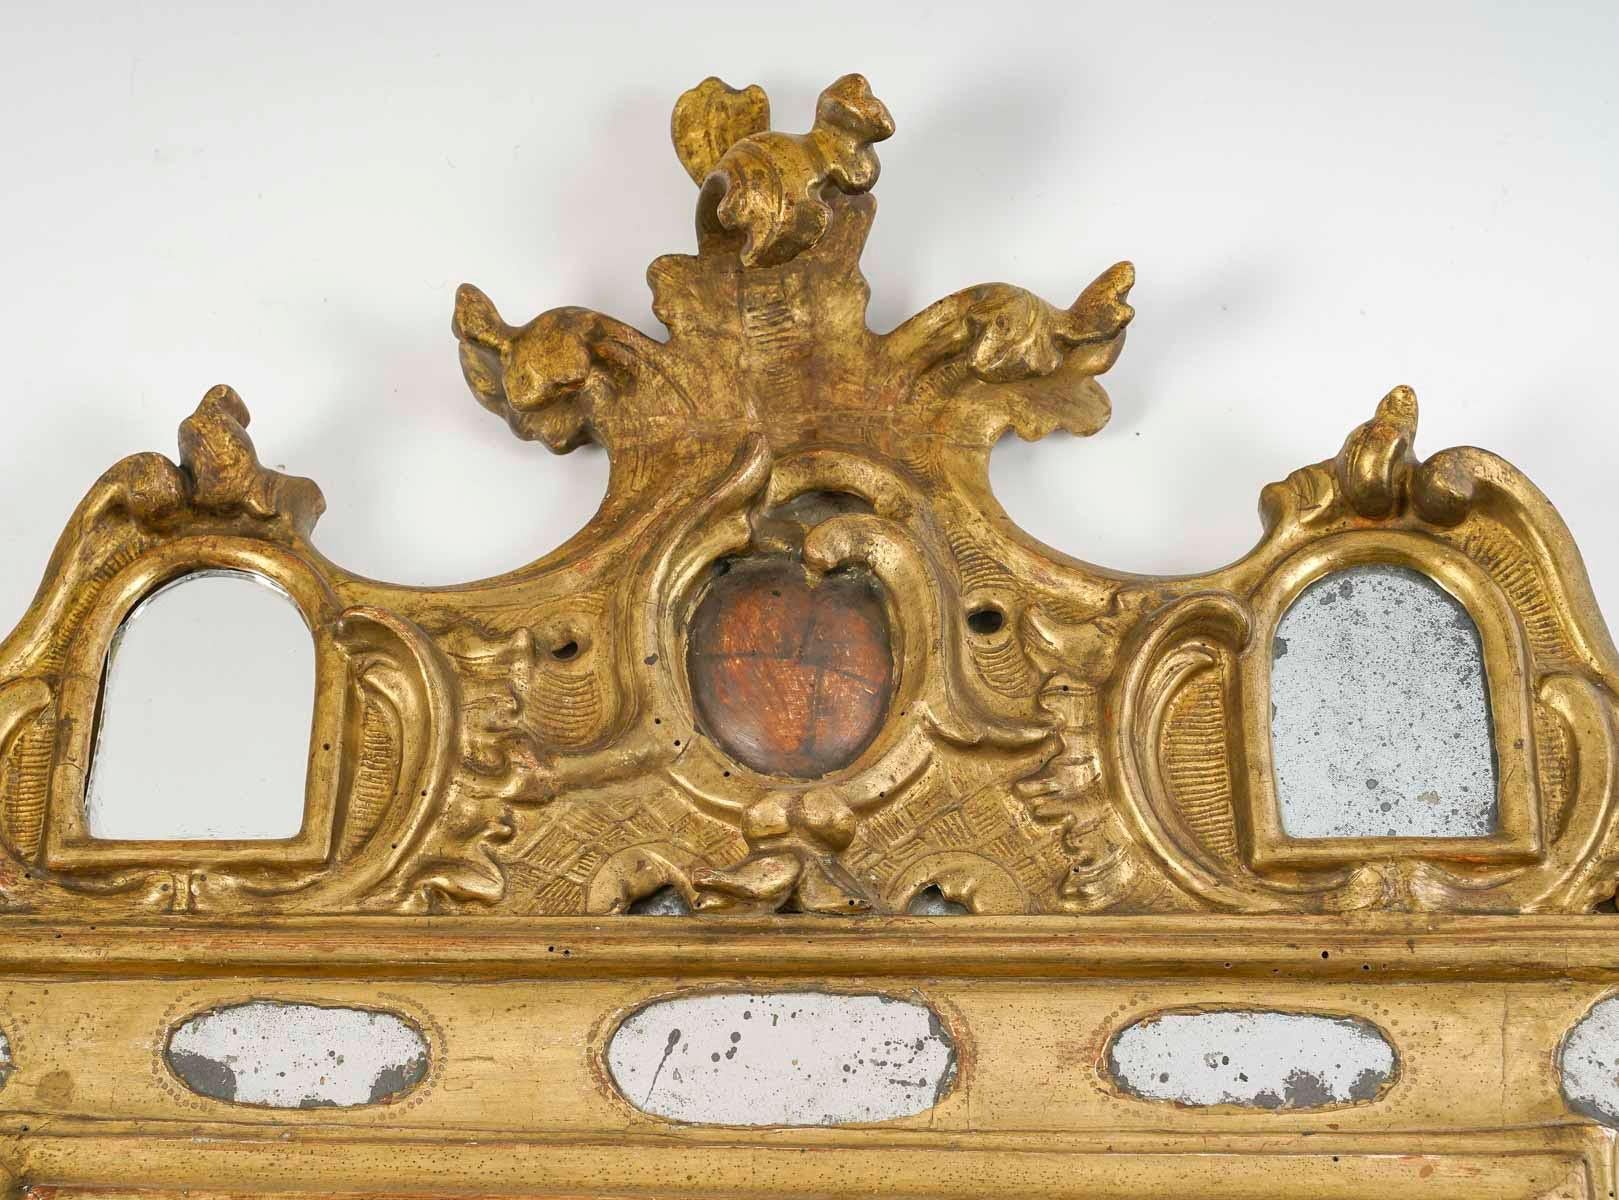 18th Century Carved and Gilded Wood Mirror.

Eighteenth century carved and gilded wood mirror with glazing beads, work of Latin America or Spain, ( 2 small cracked mirrors ).
h: 98cm, w: 71cm, d: 5cm